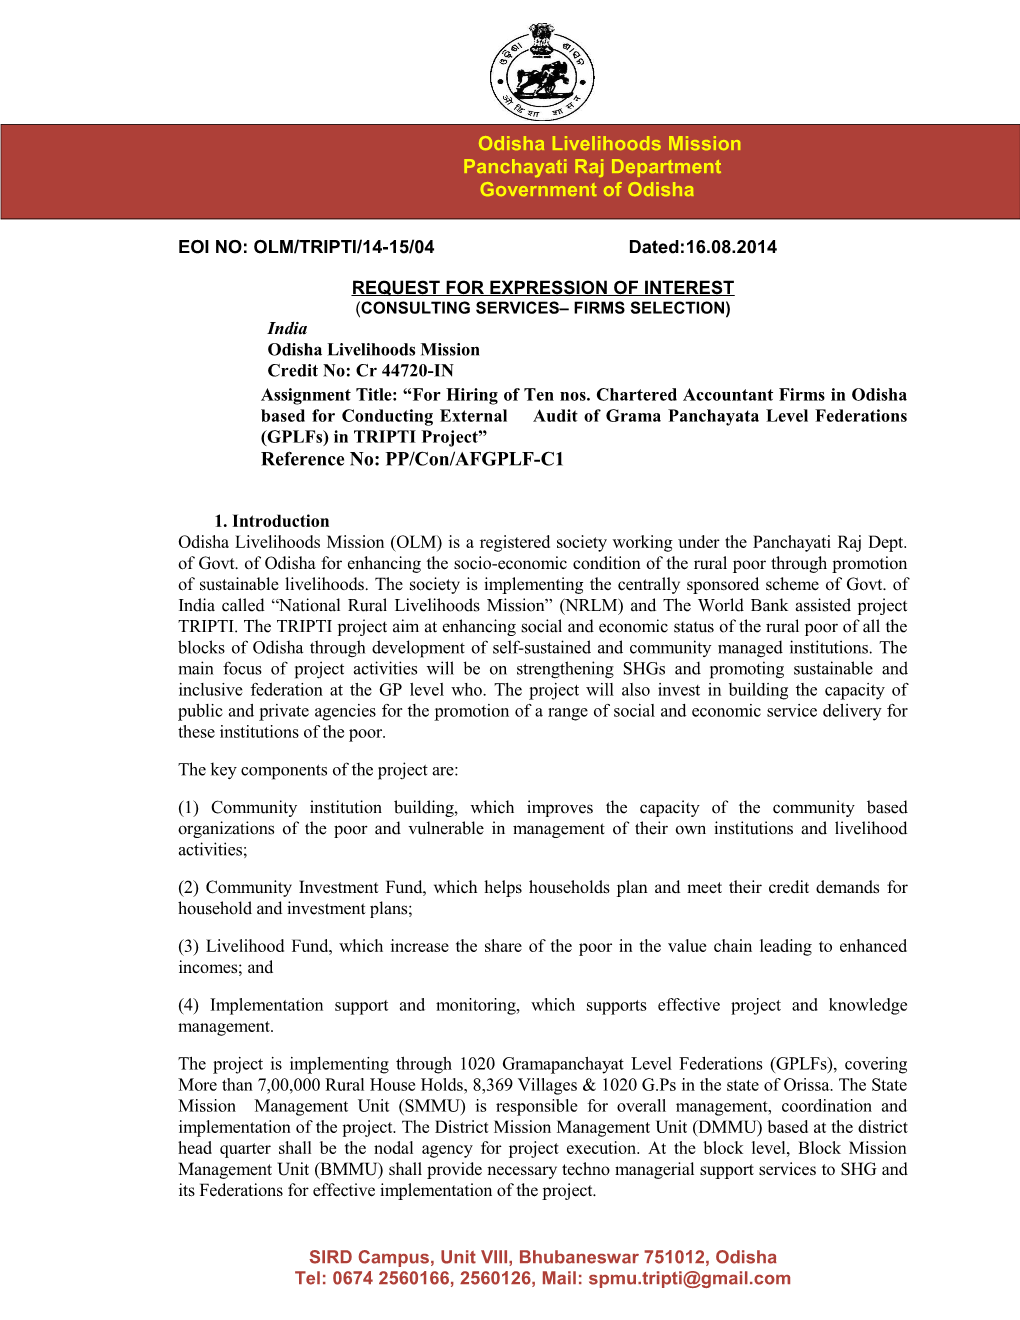 EOI NO: OLM/TRIPTI/14-15/04 Dated:16.08.2014